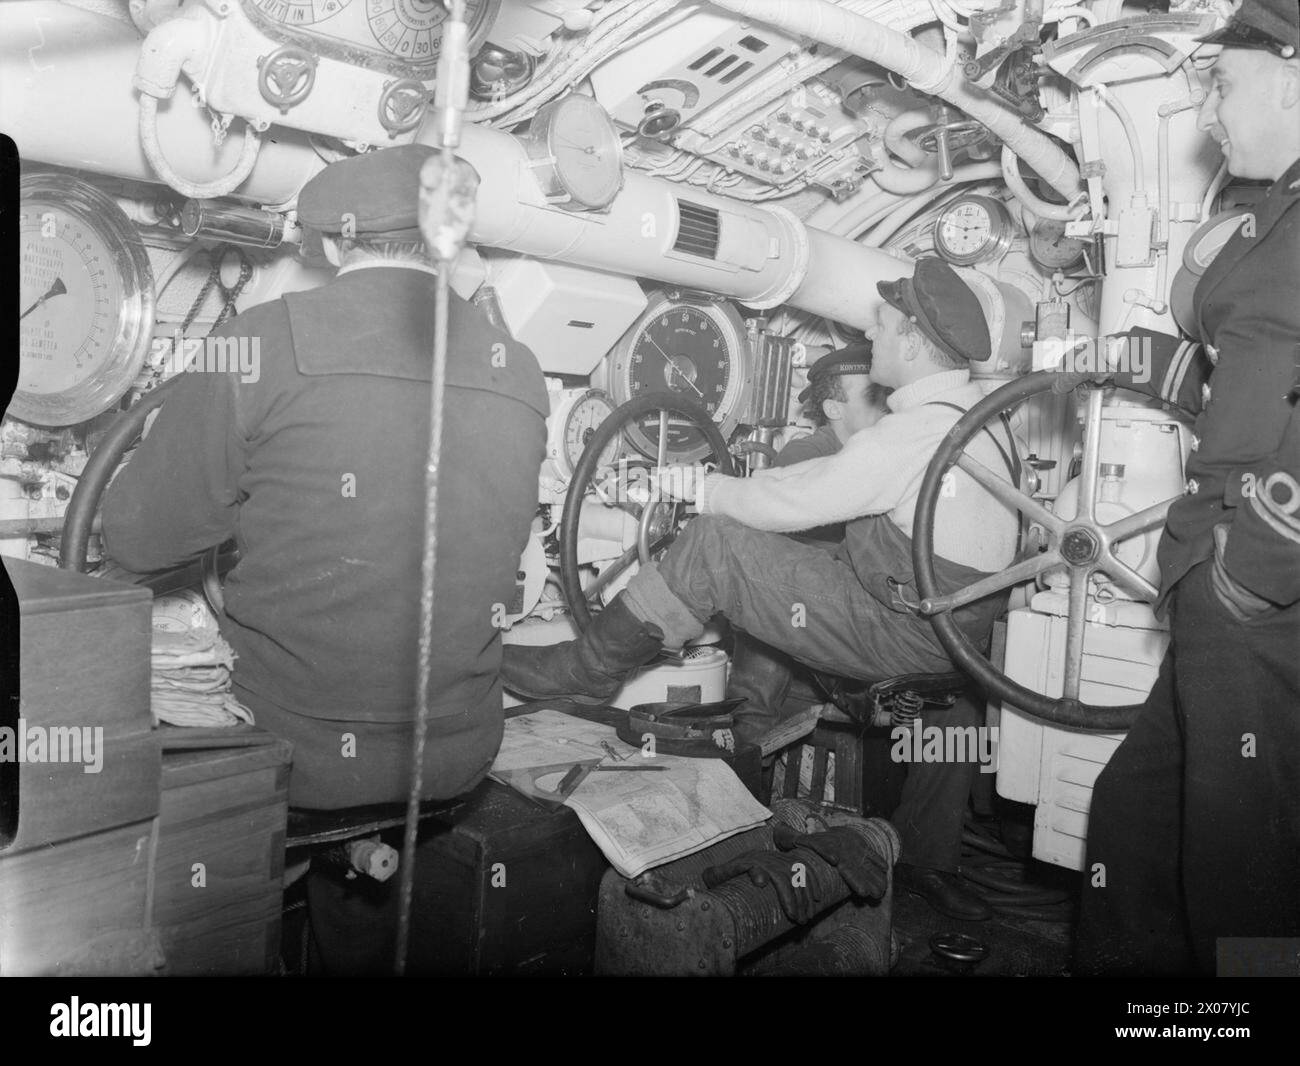 THE ROYAL NAVY DURING THE SECOND WORLD WAR - The Central Control Room, from where diving and surfacing manoeuvres are controlled on board the Dutch submarine O 14. The Hydroplane helmsmen sit in front of their gauges depth-keeping. One of the depth gauges indicates 30 feet. The Chief Engineer is seen right, an Officer in Dutch Submarines, a Chief Petty Officer in British Vessels  Royal Netherlands Navy, O14 Stock Photo